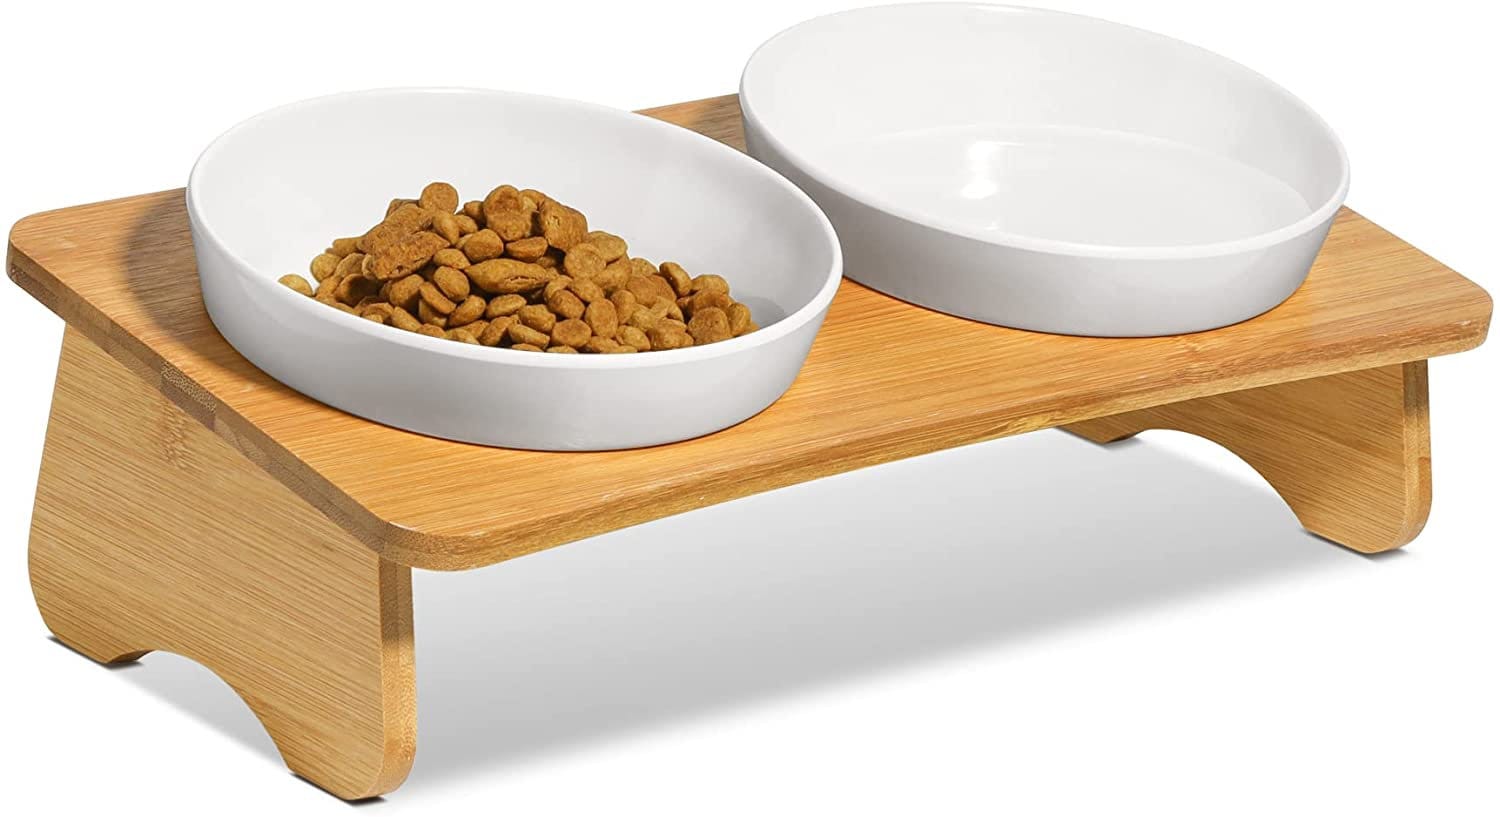 Dog and Cat Bowls Elevated Set - Acrylic Feeder Stand with 2 Set Removable Stainless Steel and Glass Bowls Food and Water Raised Dishes for Small